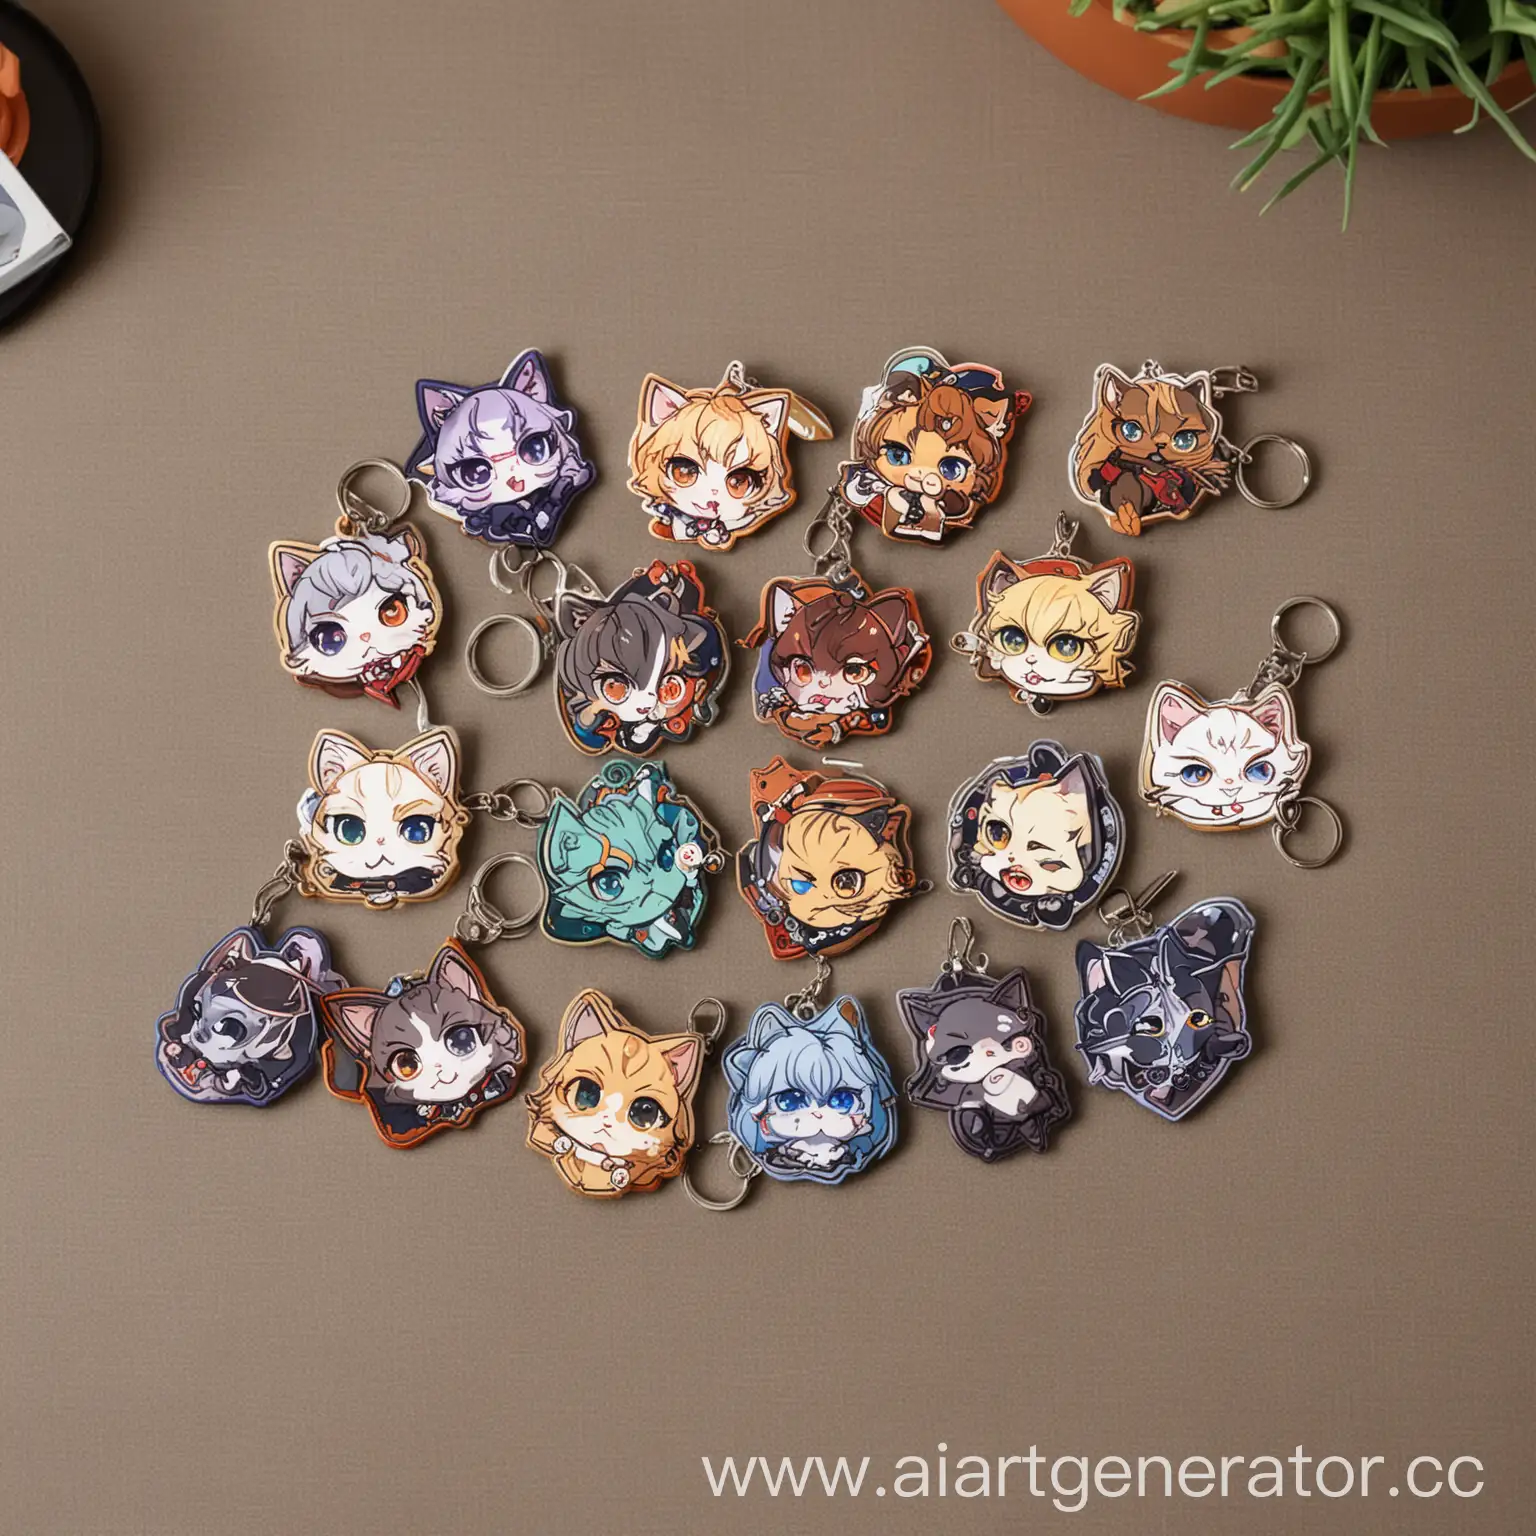 Tabletop-Collection-of-Keychains-Genshin-Impact-Badges-and-Anime-Stickers